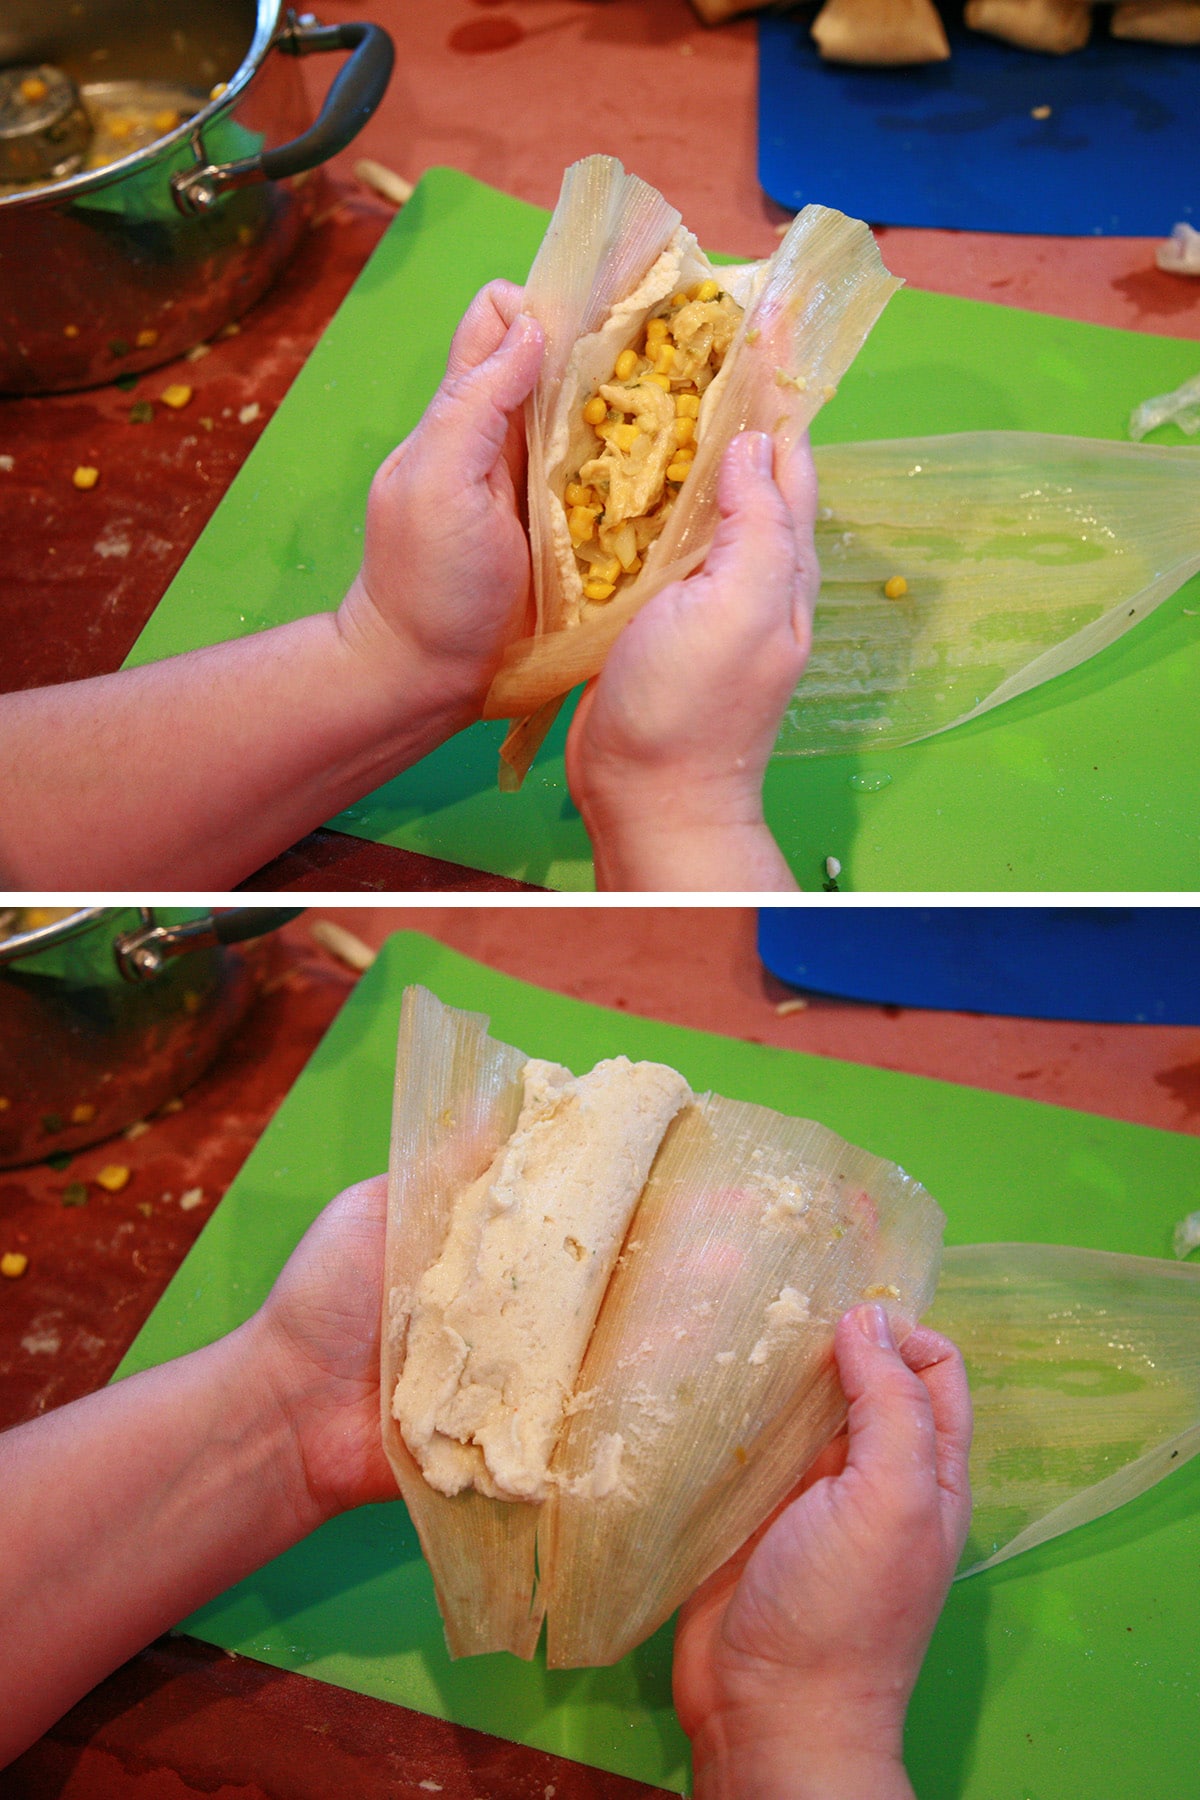 The filled corn husk is olded in half and pressed together.